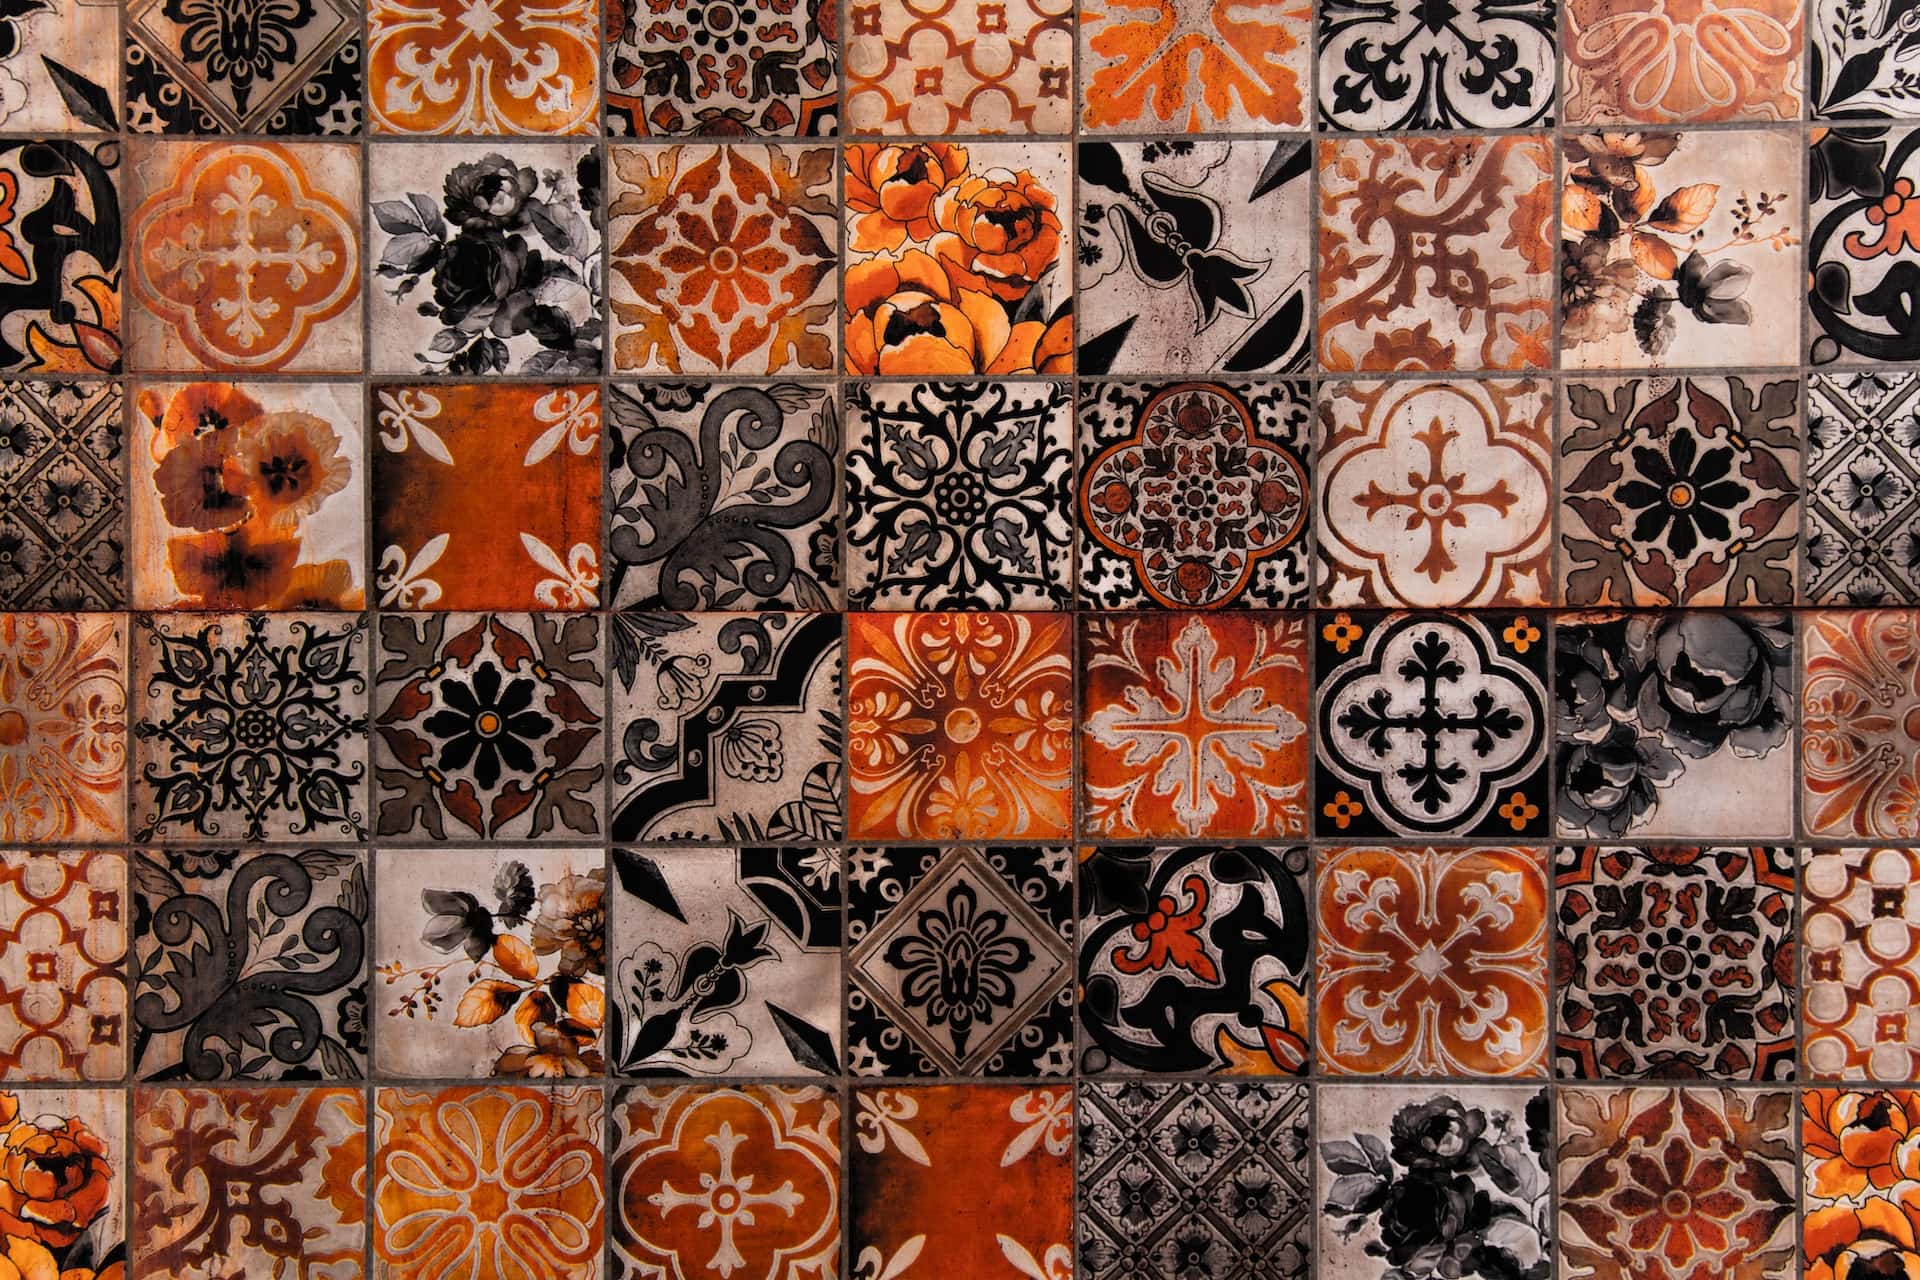 Different Types of Tiles